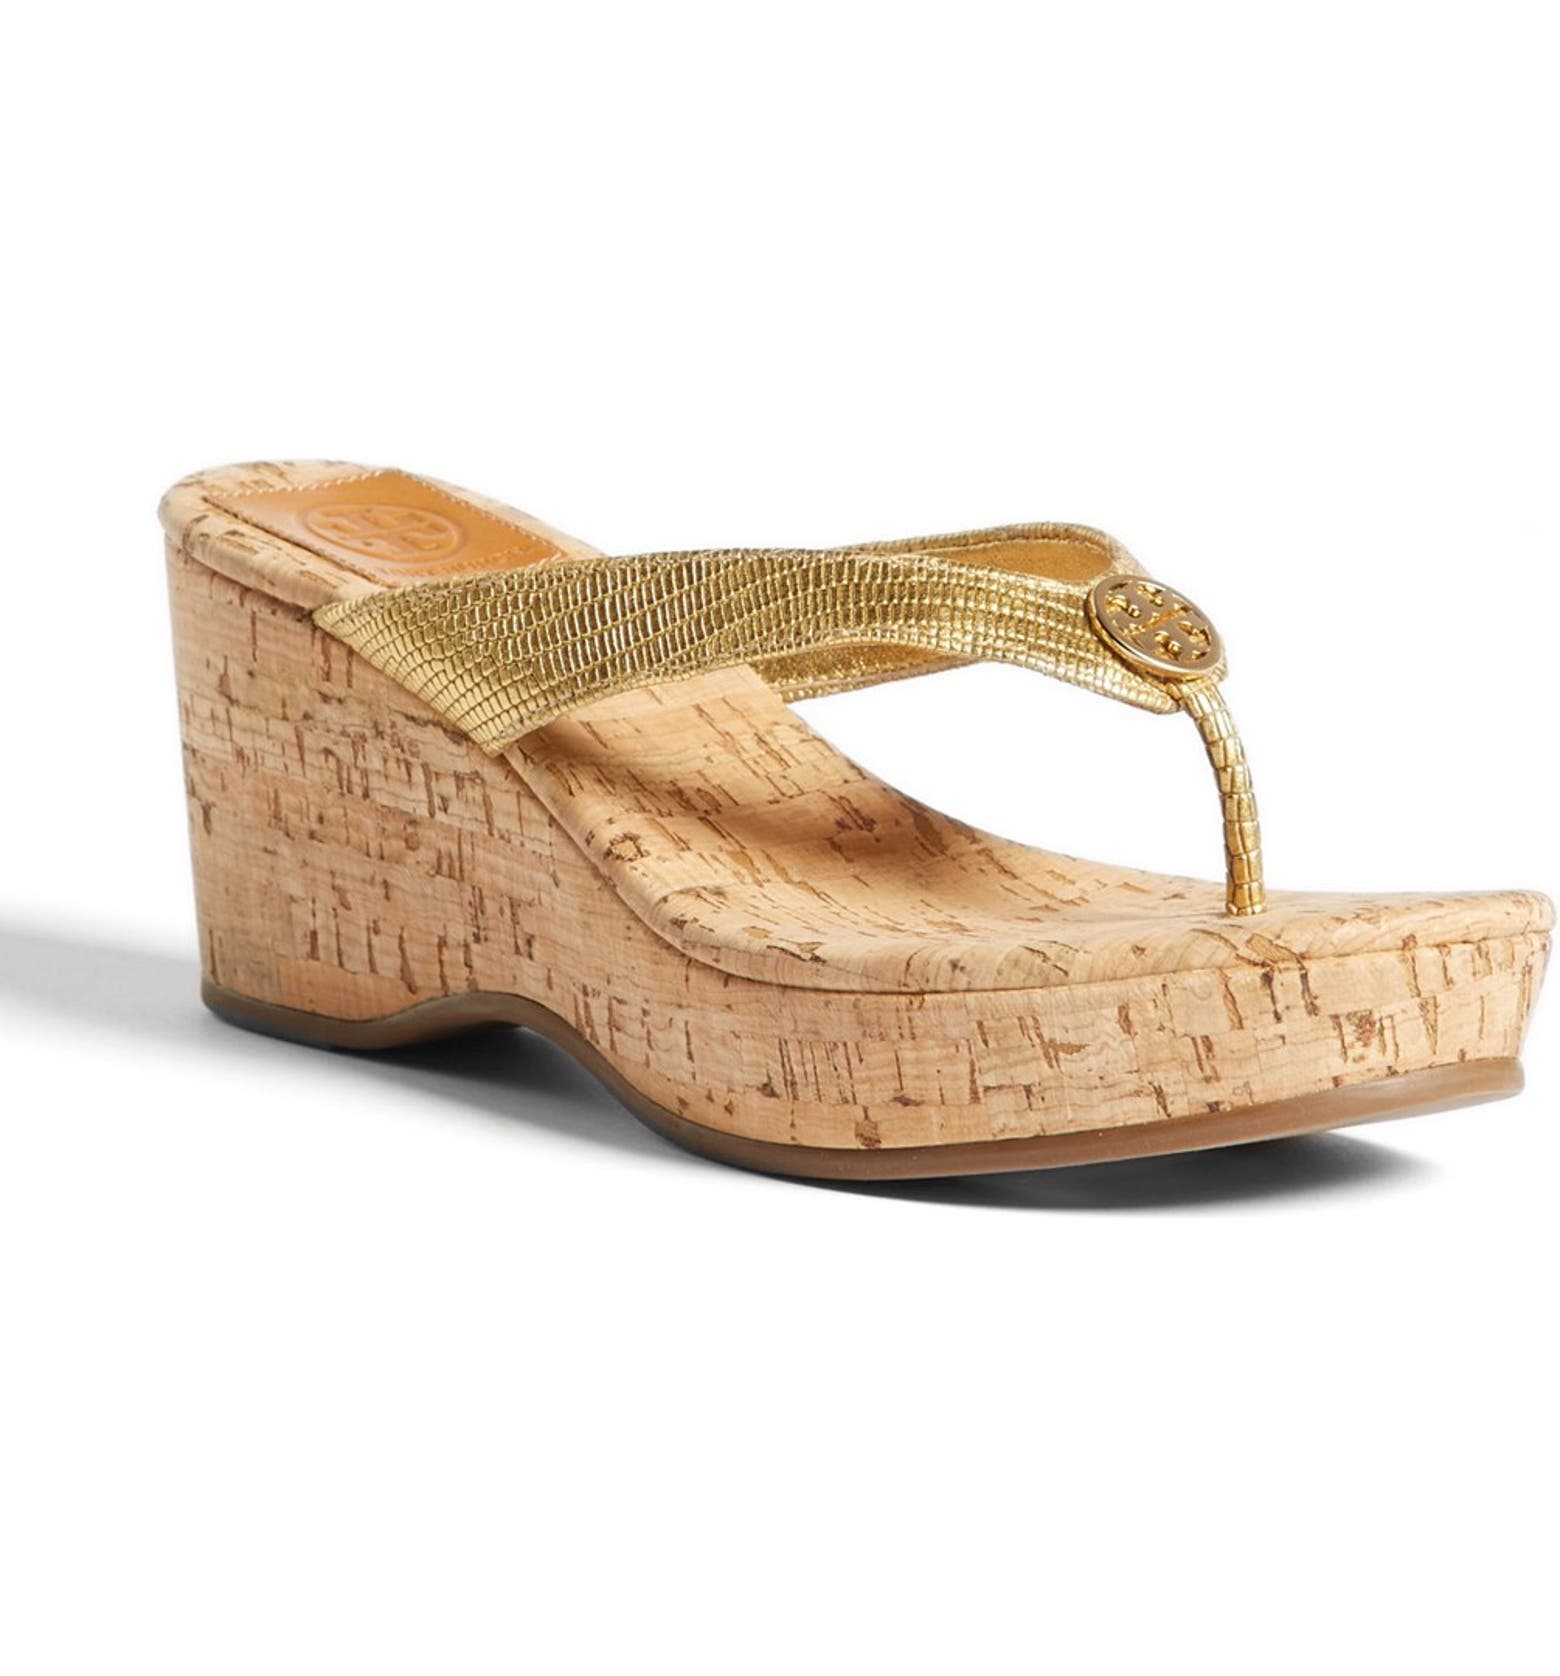 Tory Burch 'Suzy' Wedge Sandal Nordstrom